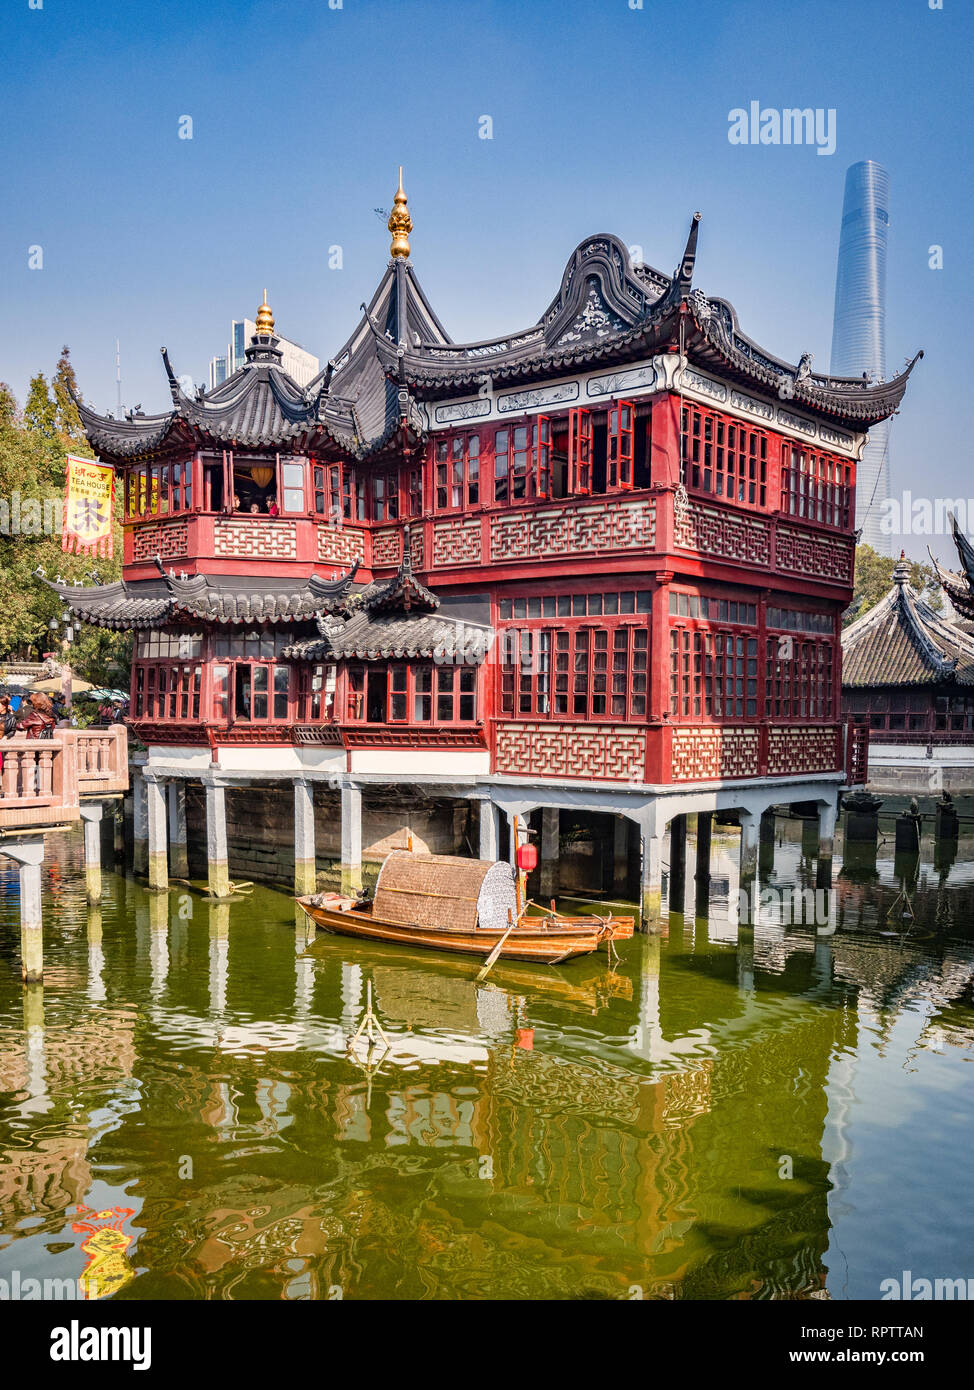 29 November 2018 - Shanghai, China  -  The Huxinting Tea House and Nine Turn Bridge in the Yu Garden area of the Old Town, Shanghai Stock Photo